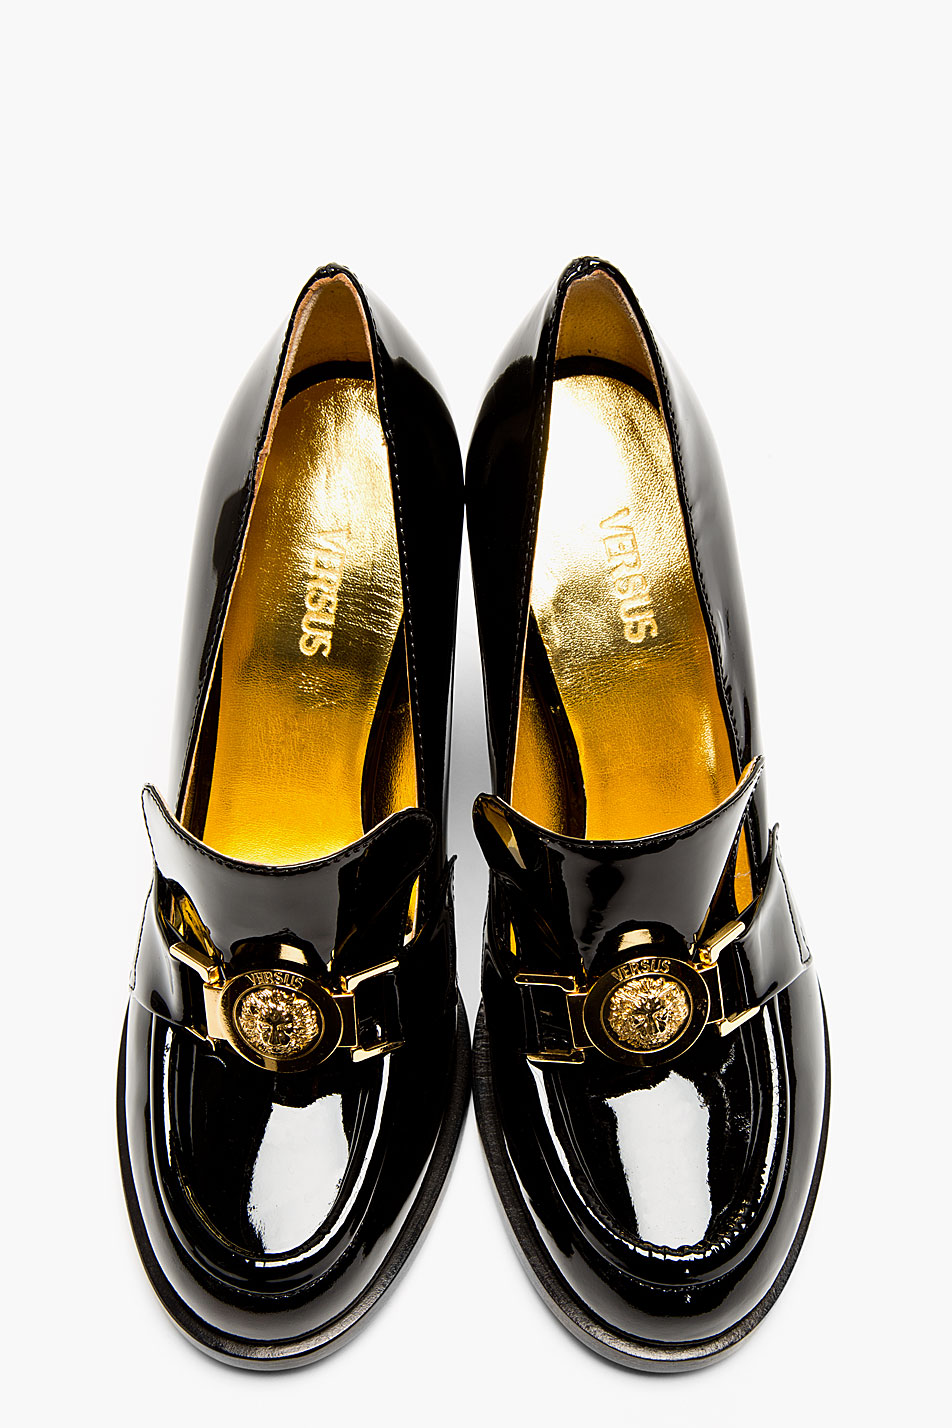 Lyst - Versus Black Patent Leather Heeled Loafers in Black